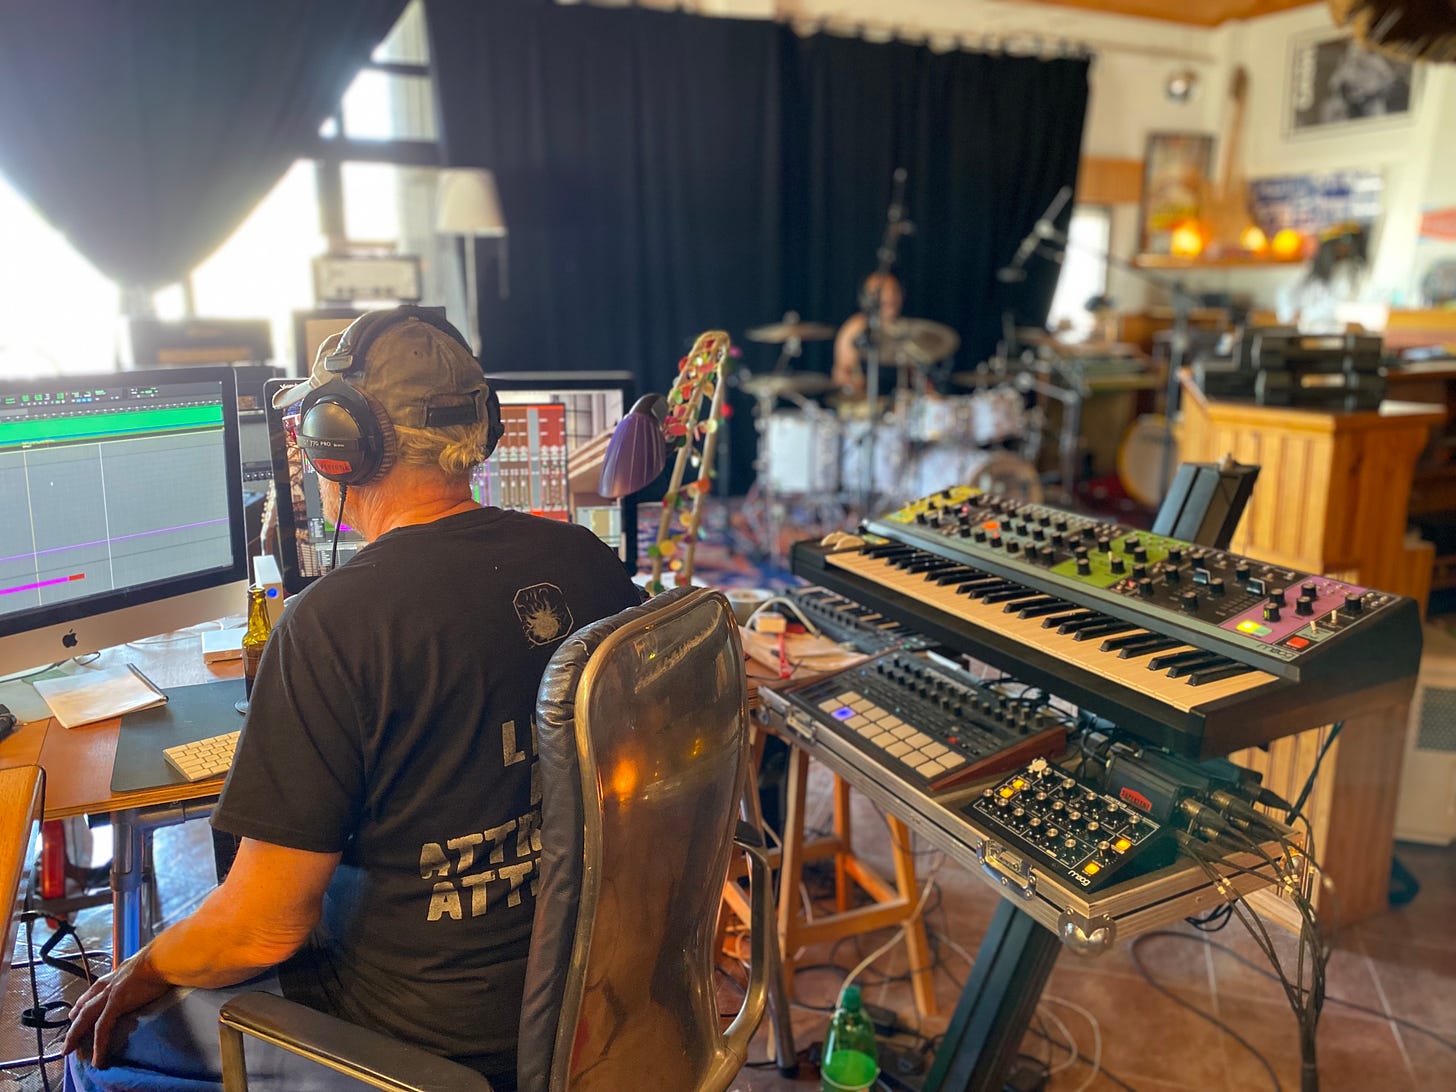 Simon Campbell recording at Supertone studios, Portugal. On the rigth is a Moog Matriach synth, Moog Minitaur and Tempest drum machine!